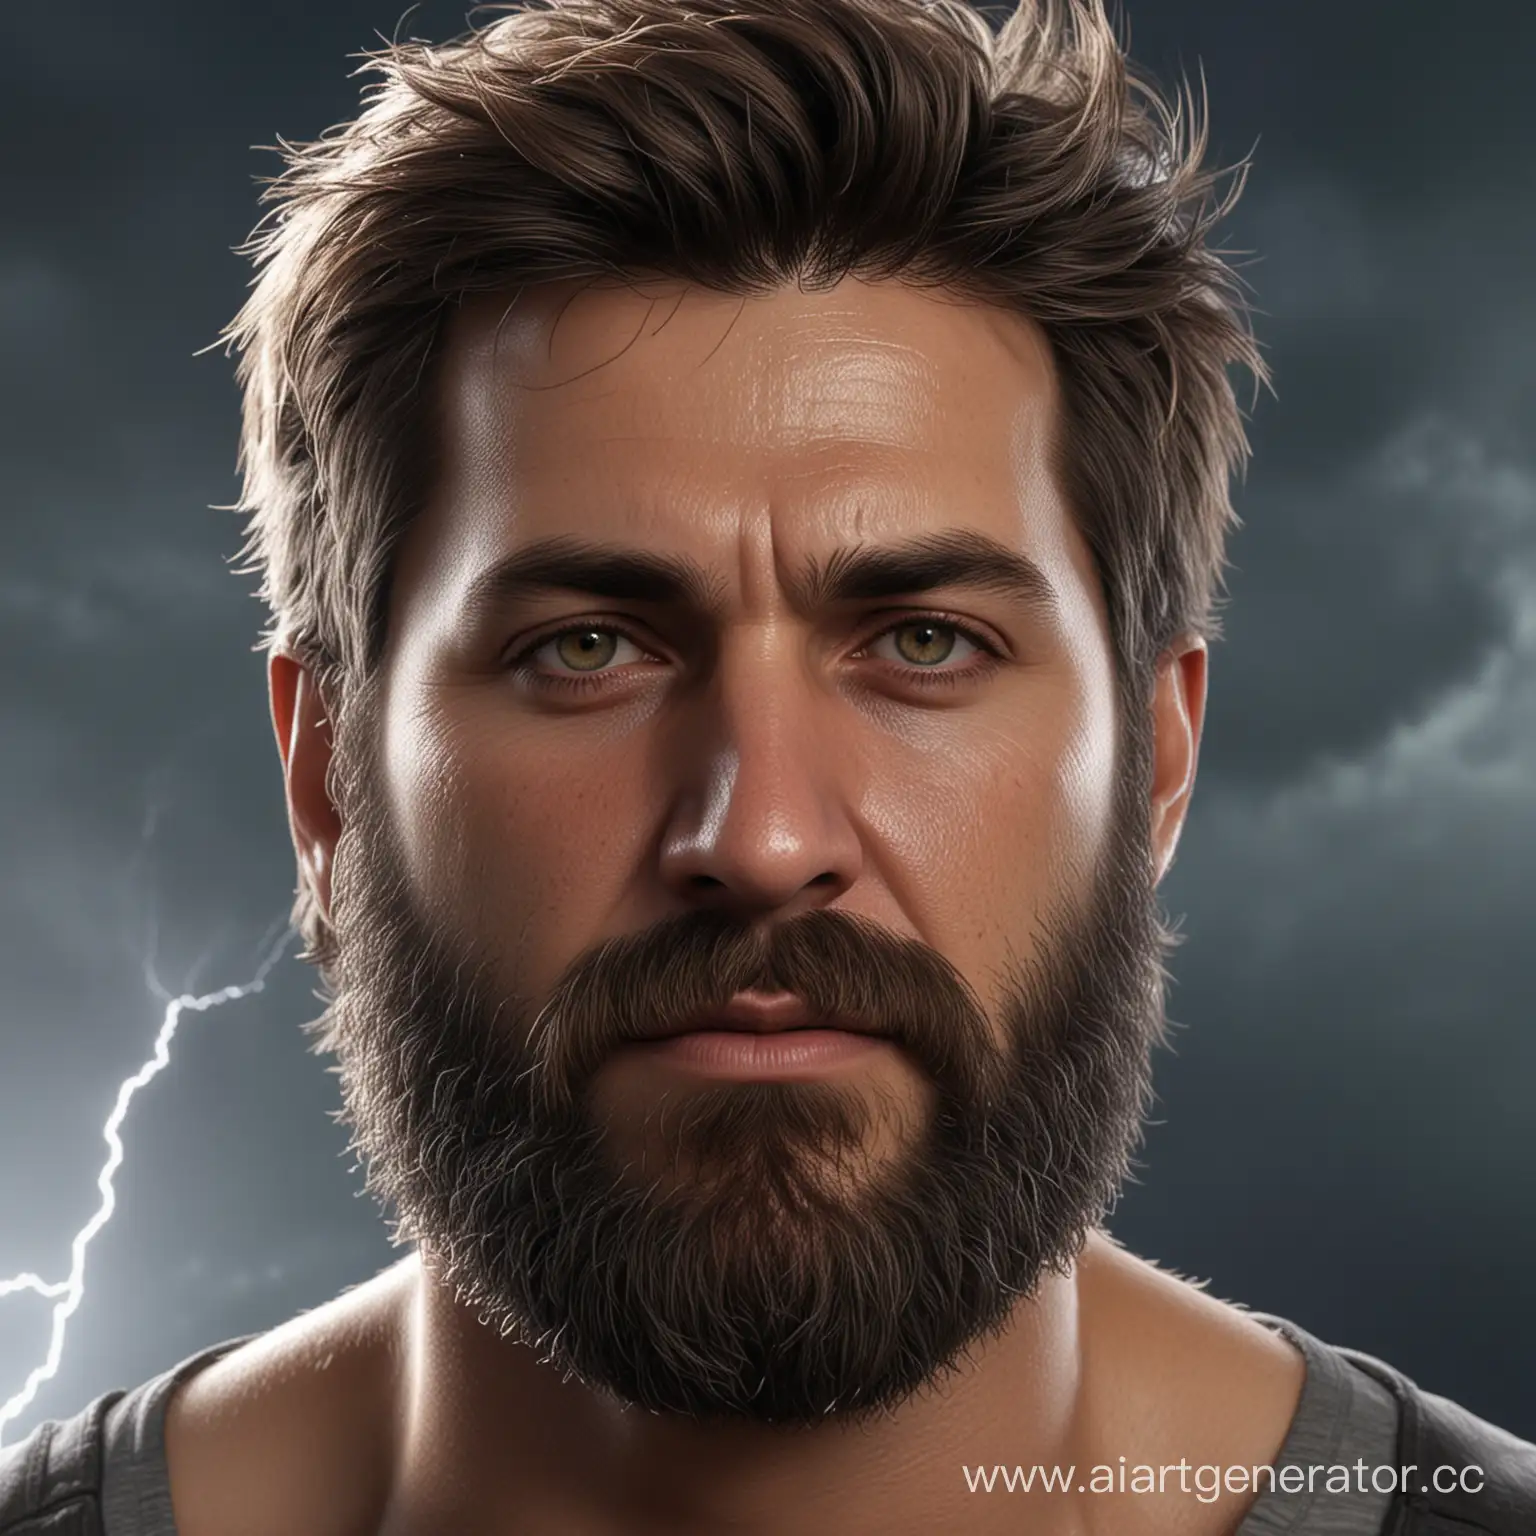 UltraRealistic-Bearded-Man-Portrait-with-Stunning-Detail-and-HDR-Lighting